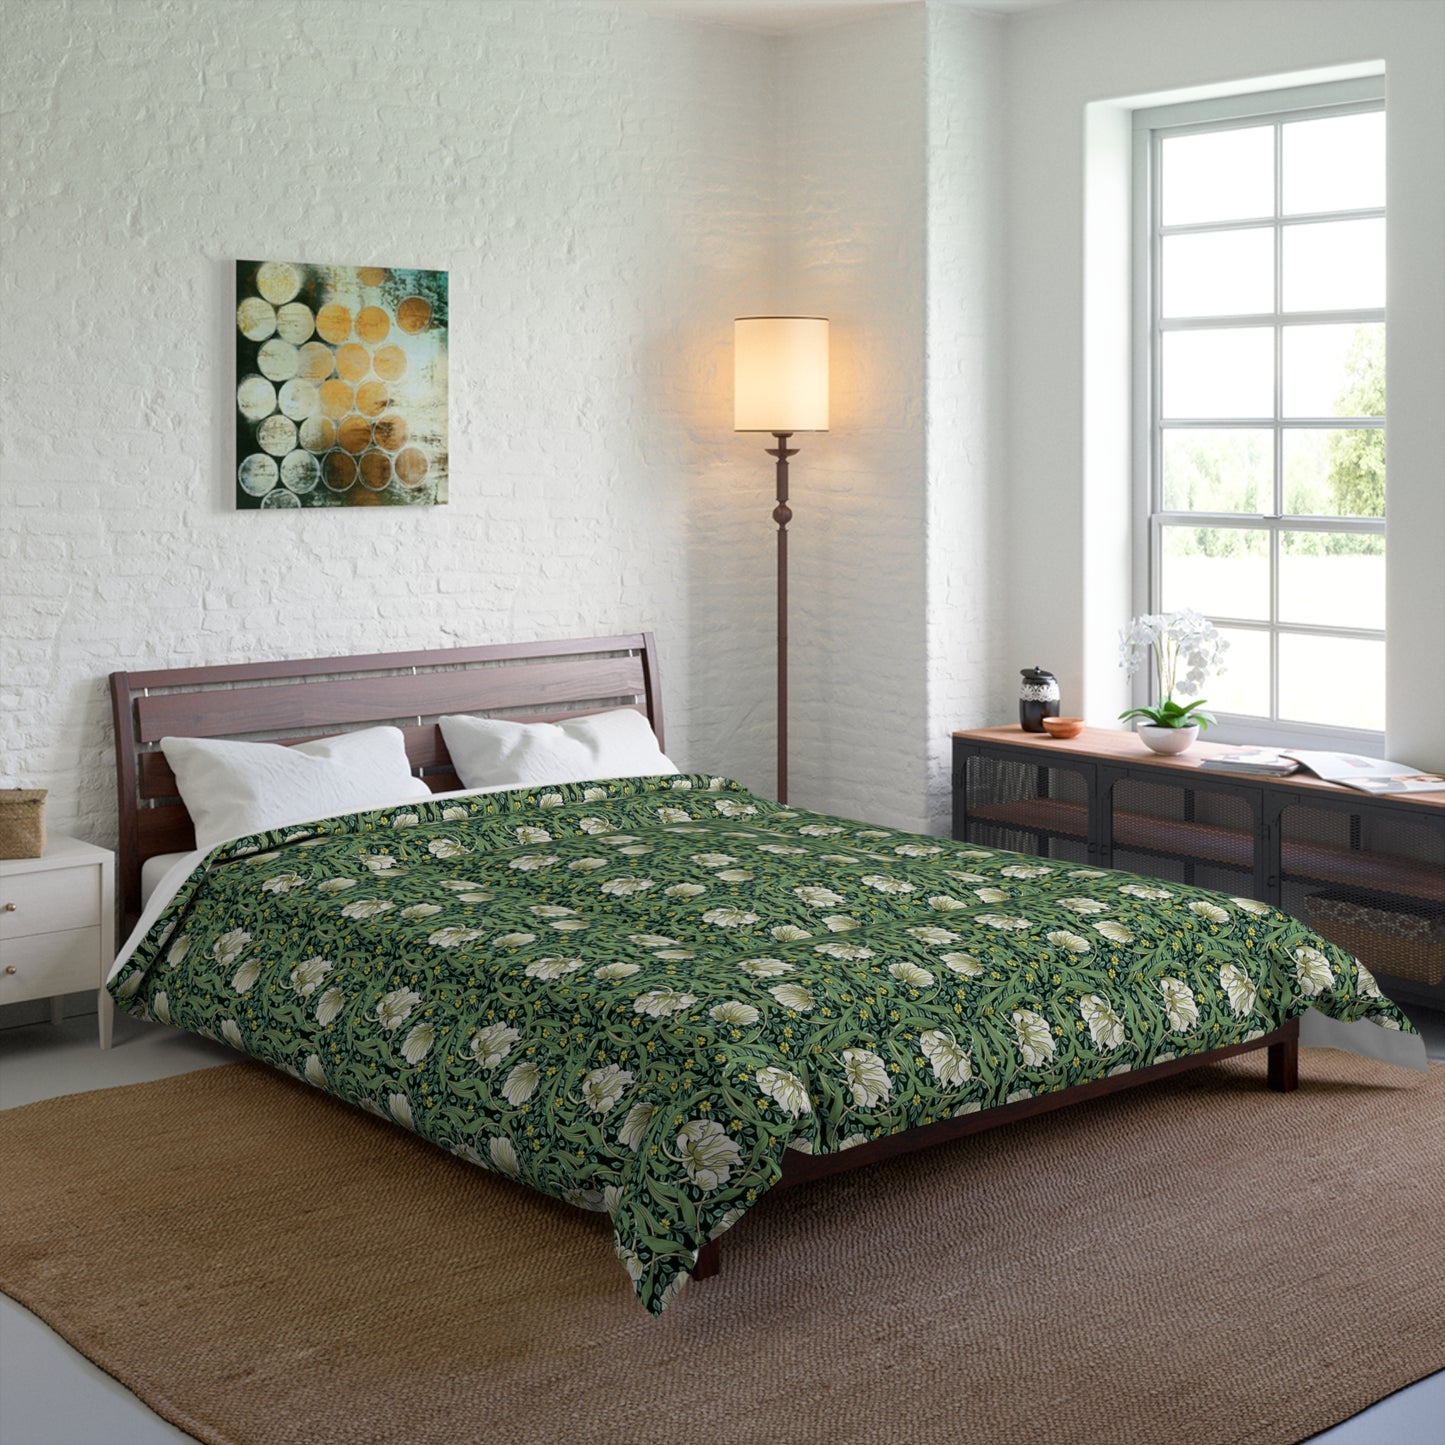 william-morris-co-comforter-pimpernel-collection-green-1